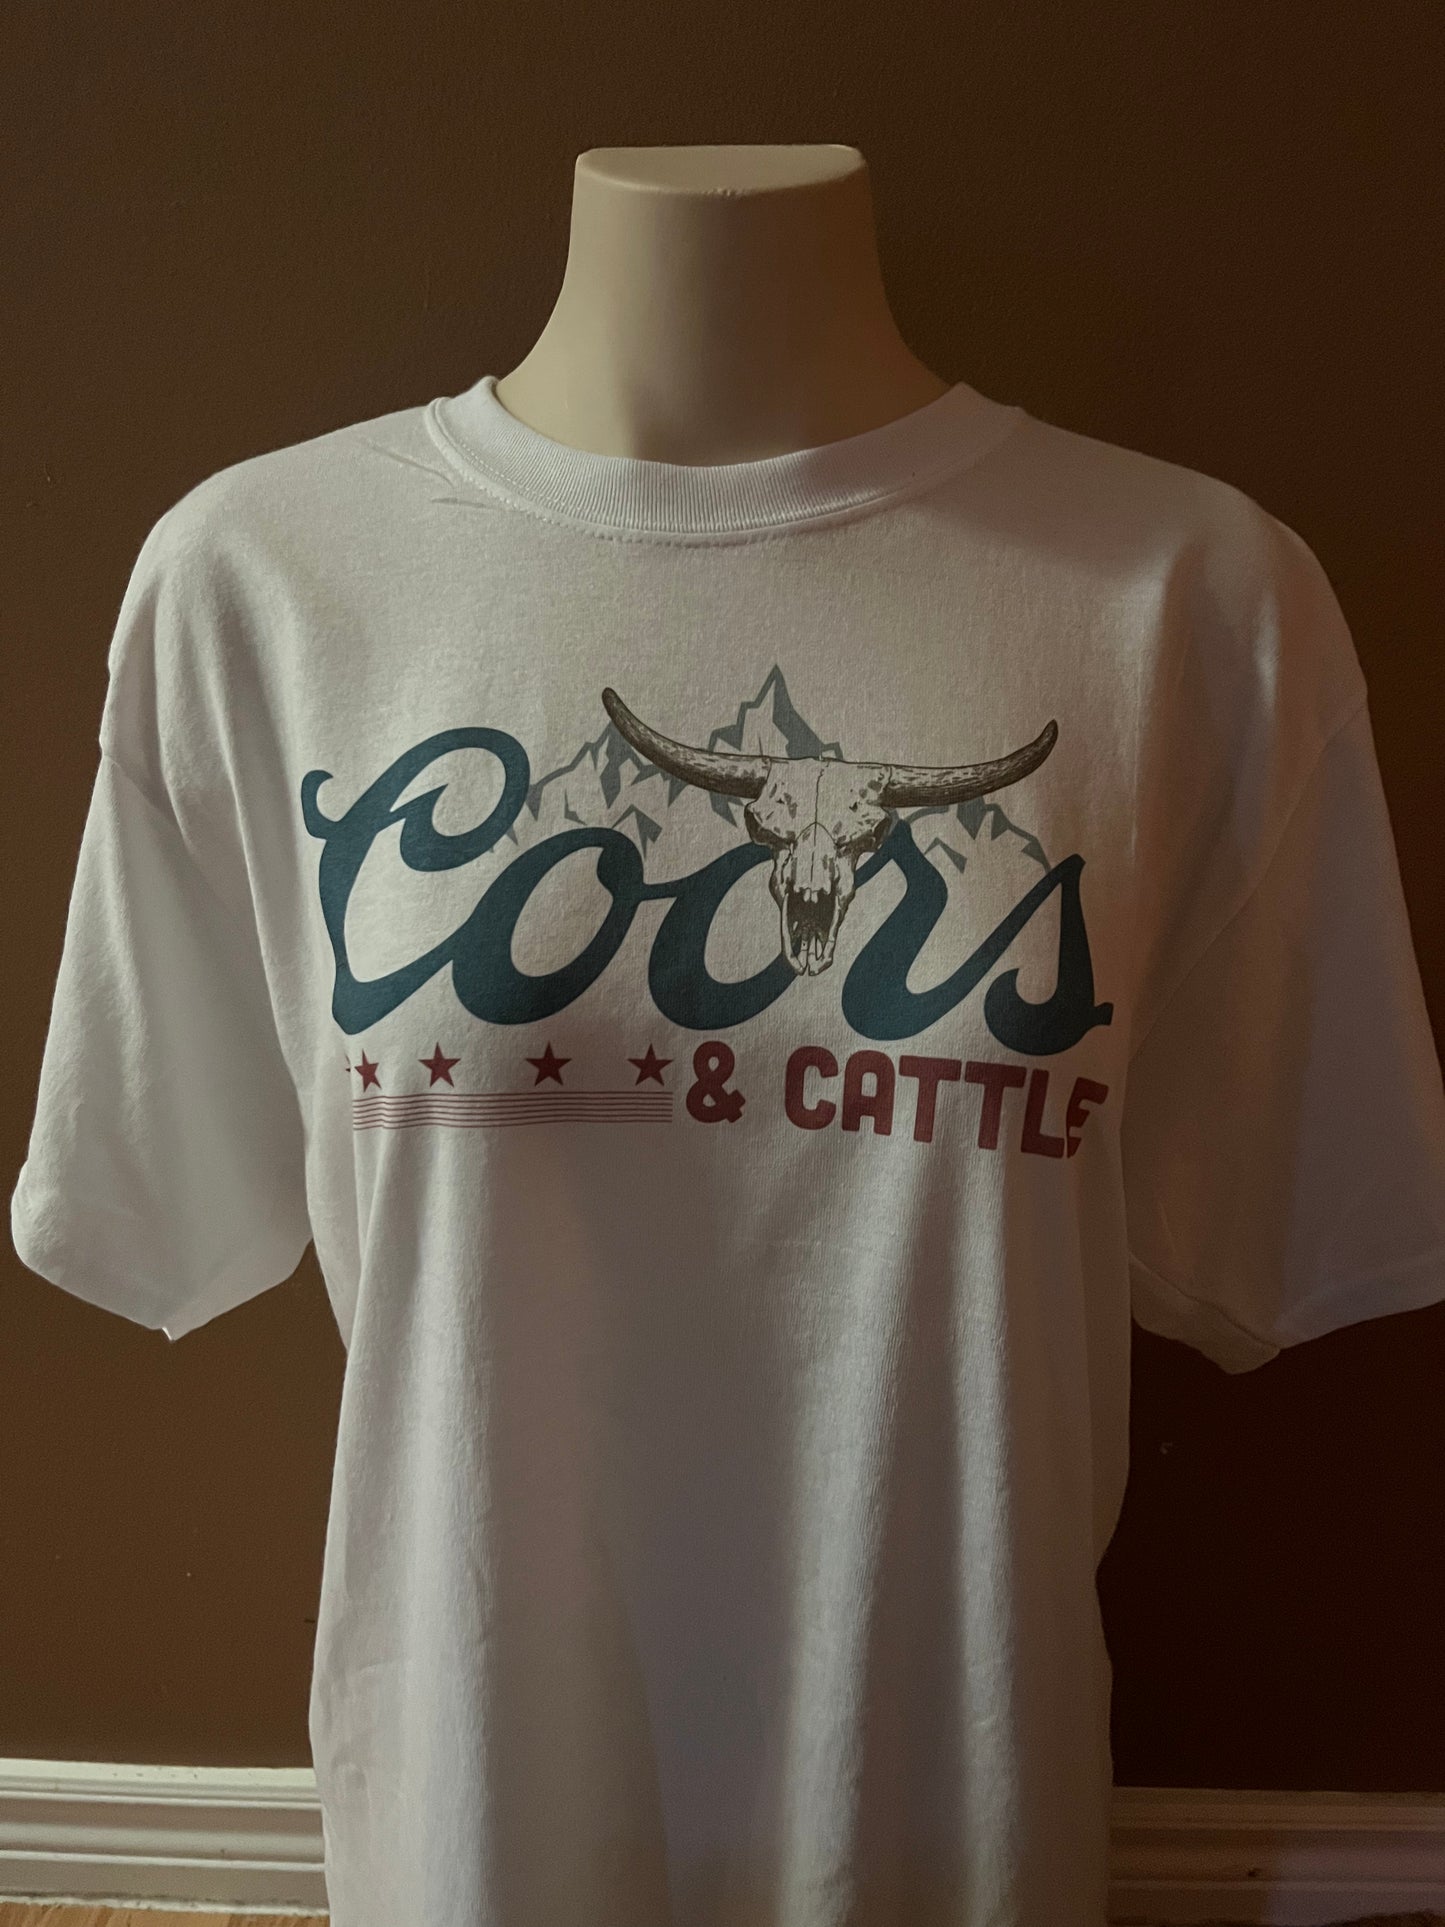 Coors and Cattle Unisex T-shirt (Made to Order)